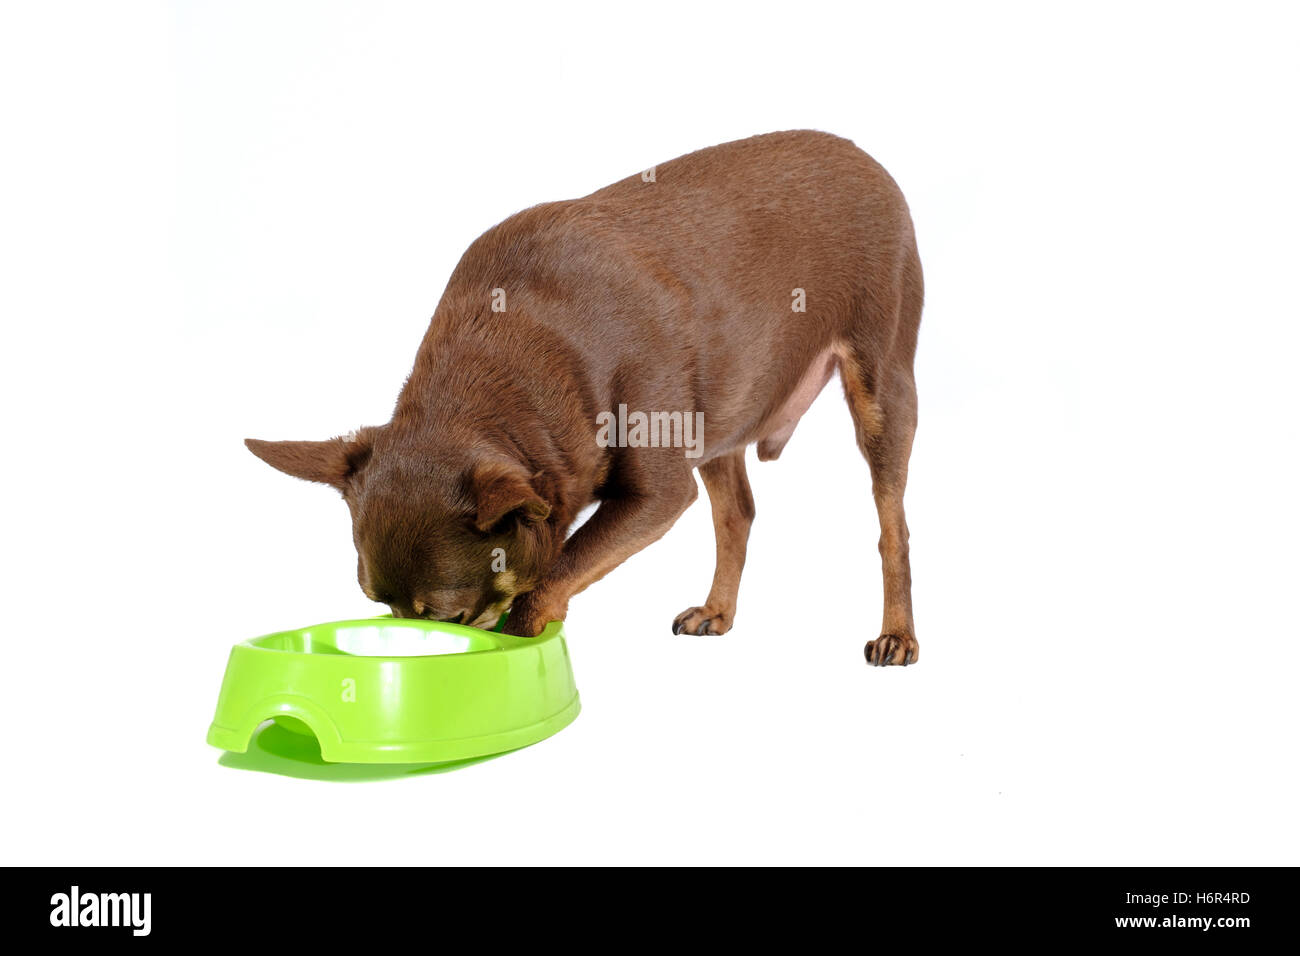 Overweight russian toy dog eating Stock Photo